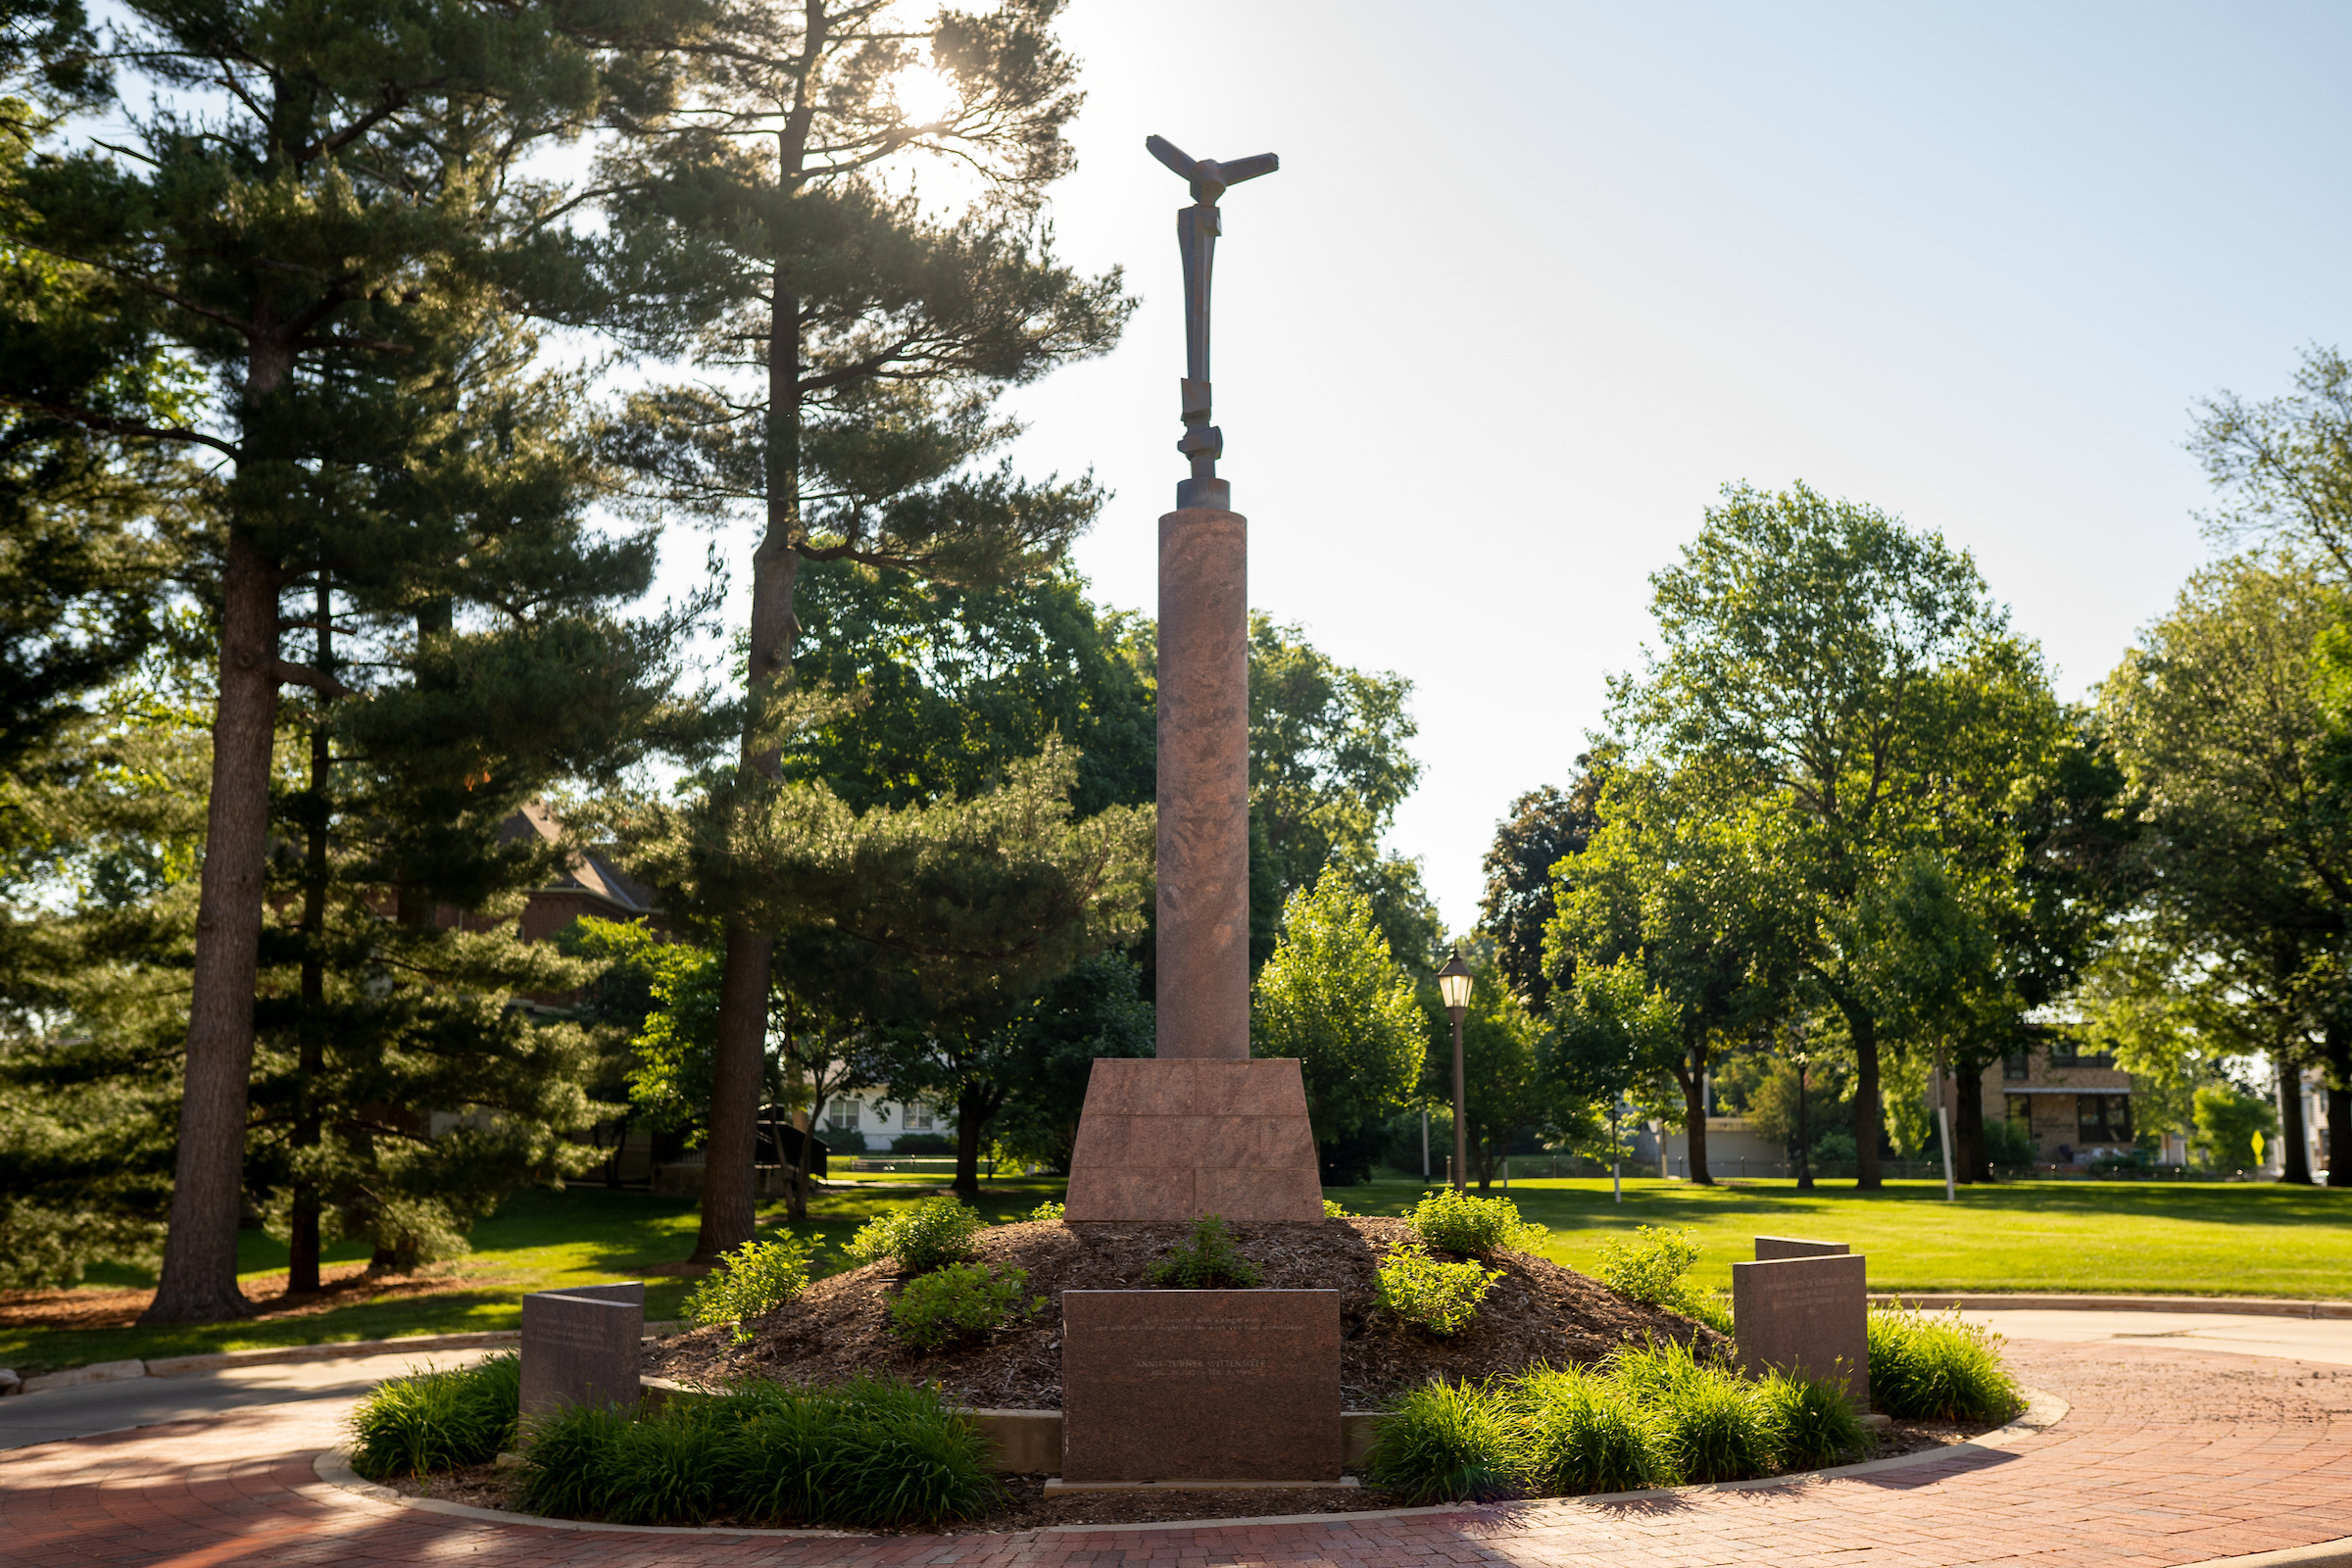 View of memorial statue on the UNI campus outside in the summer